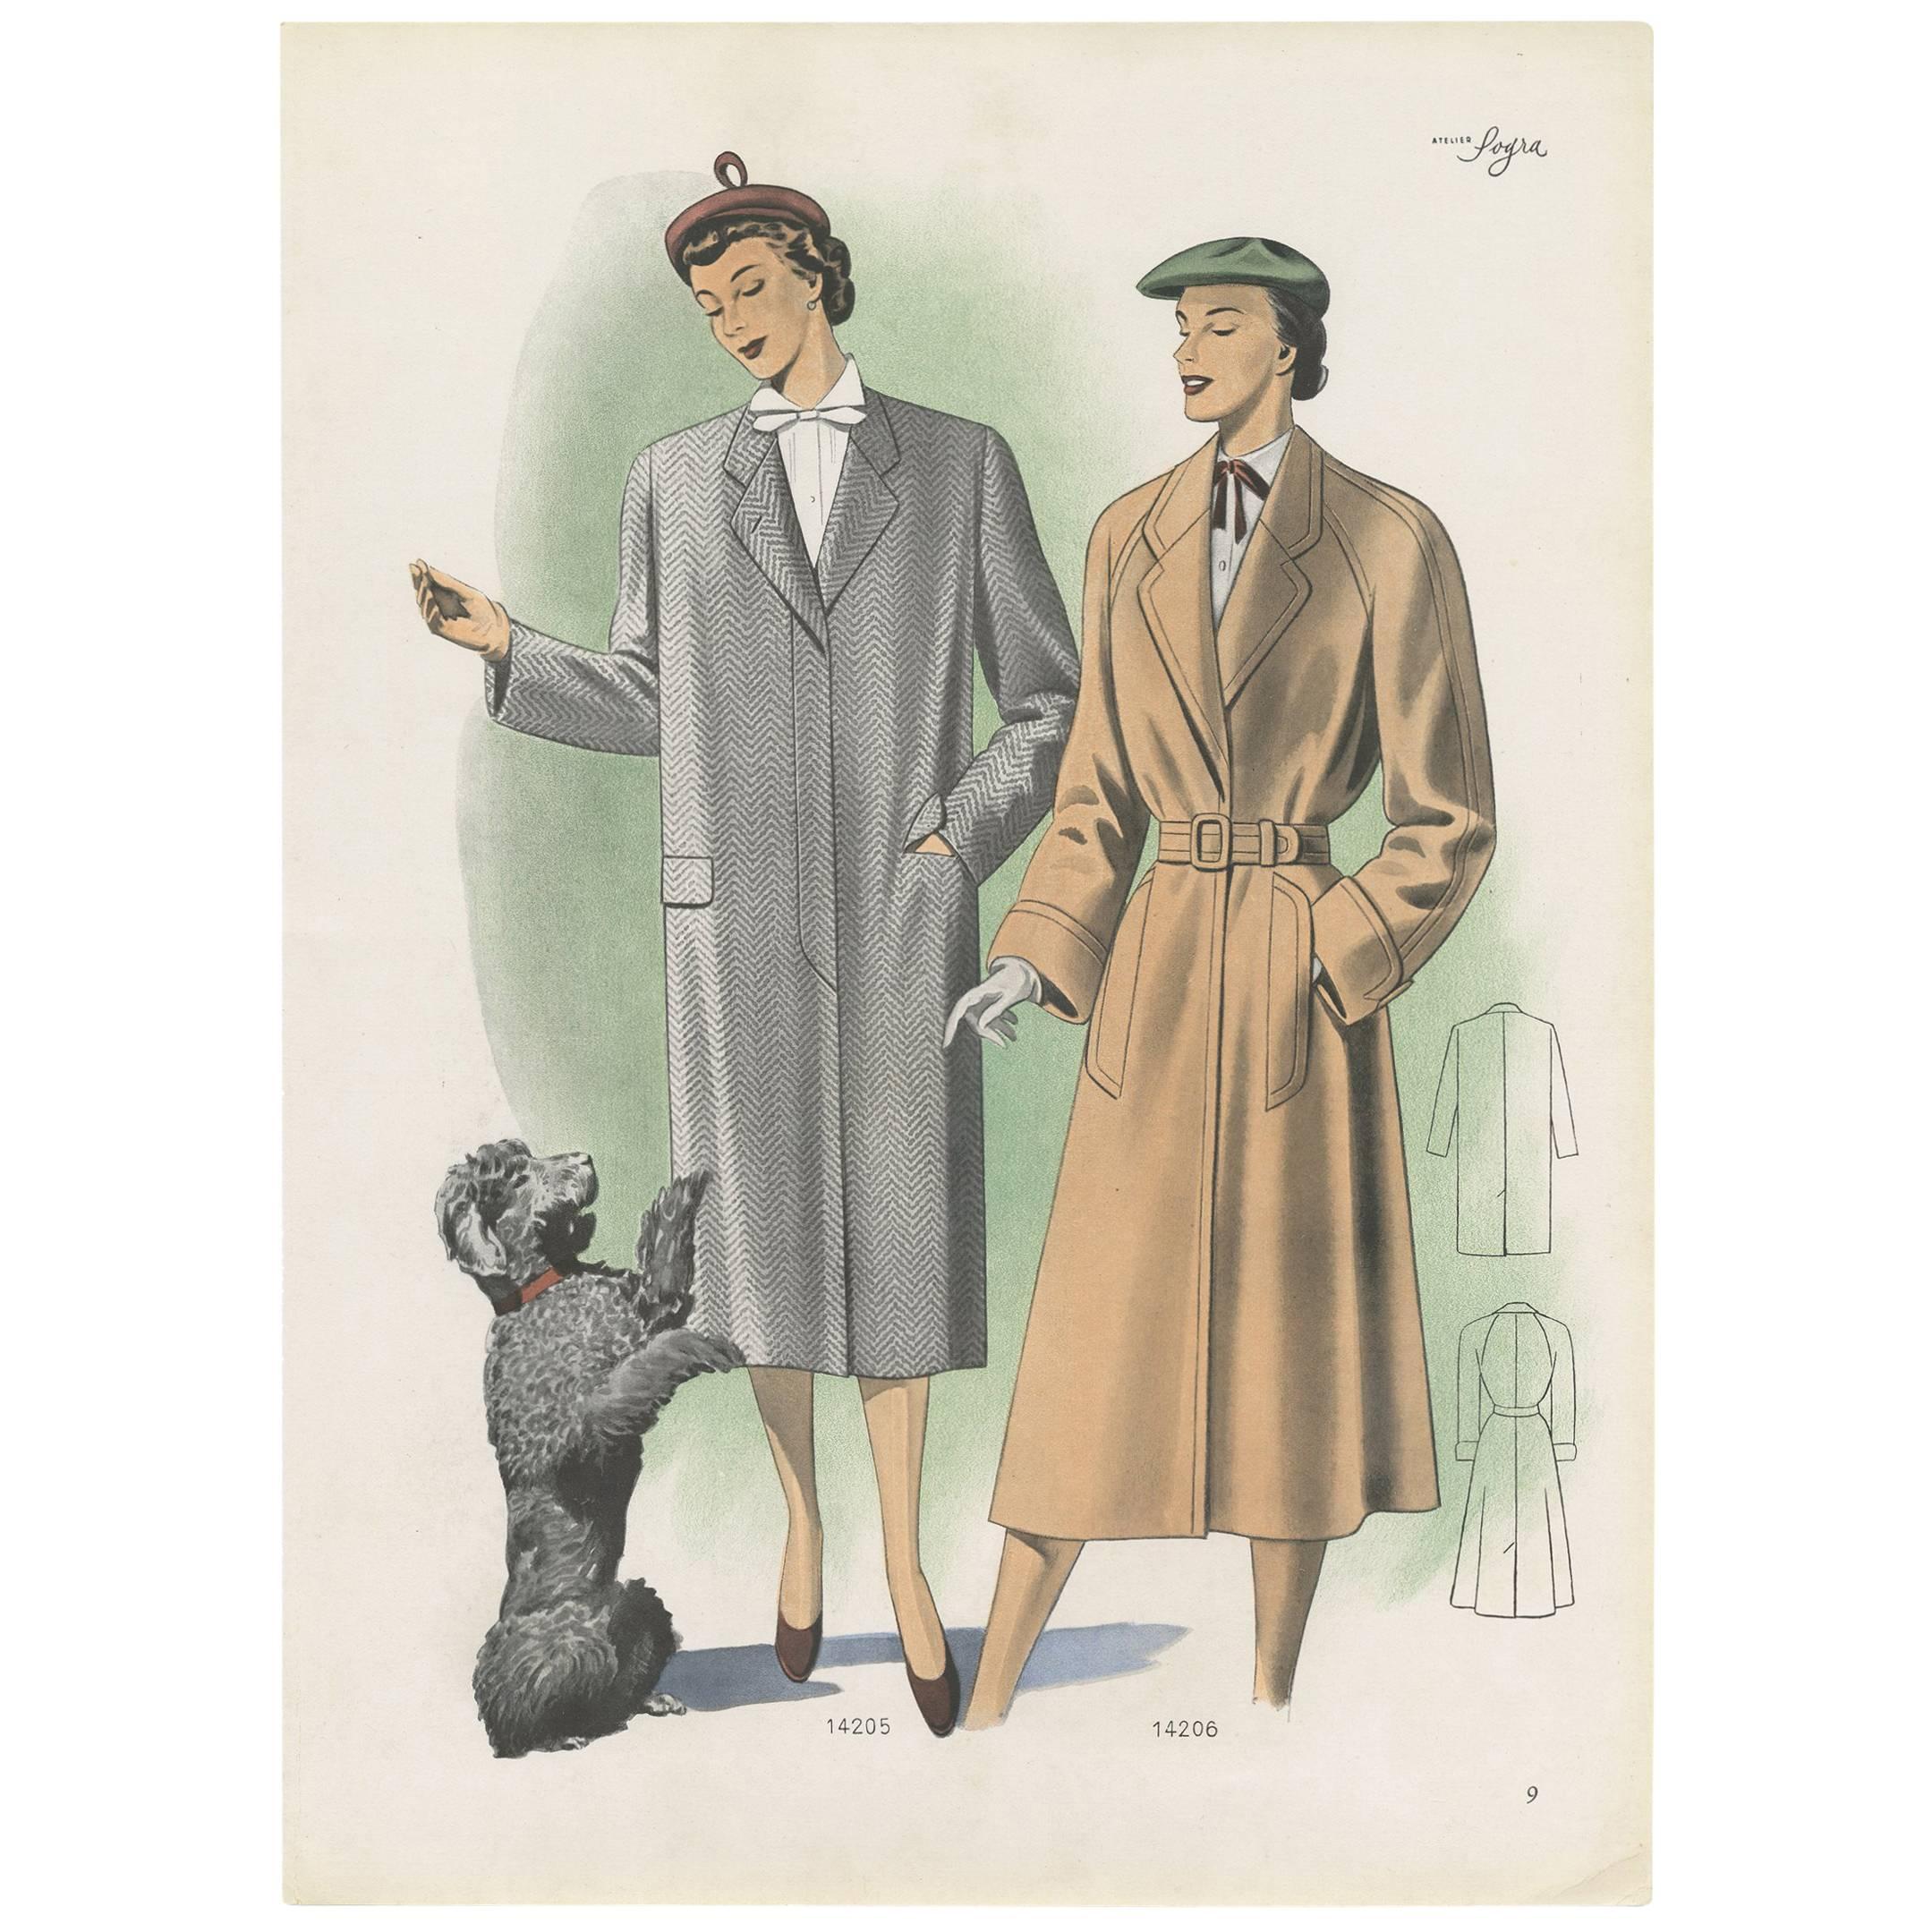 Vintage Fashion Print 'Pl.14205' Published in Ladies Styles, 1951 For Sale